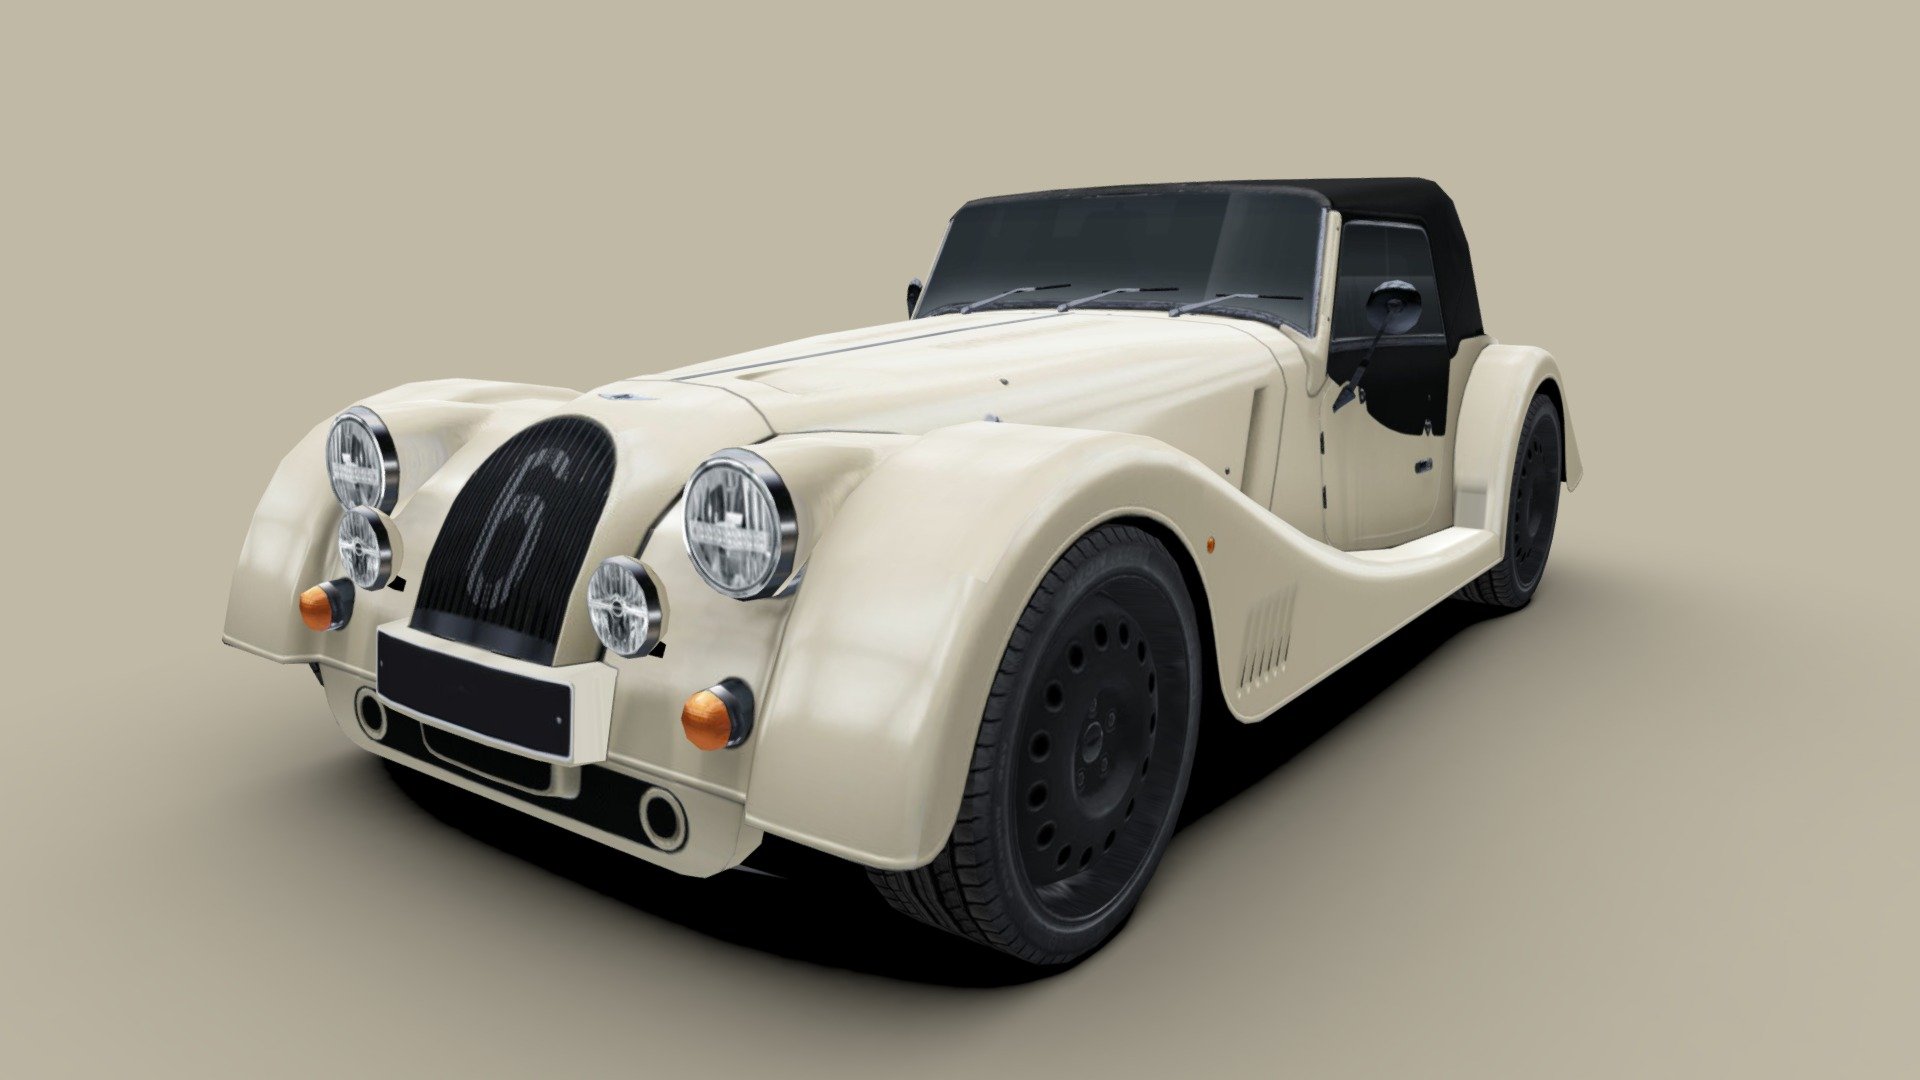 3d model of the 2023 Morgan Plus Six, a 2-door roadster Sports car

The model is very low-poly, full-scale, real photos texture (single 2048 x 2048 png).

Package includes 5 file formats and texture (3ds, fbx, dae, obj and skp)

Hope you enjoy it.

José Bronze - Morgan Plus Six 2023 - Buy Royalty Free 3D model by Jose Bronze (@pinceladas3d) 3d model